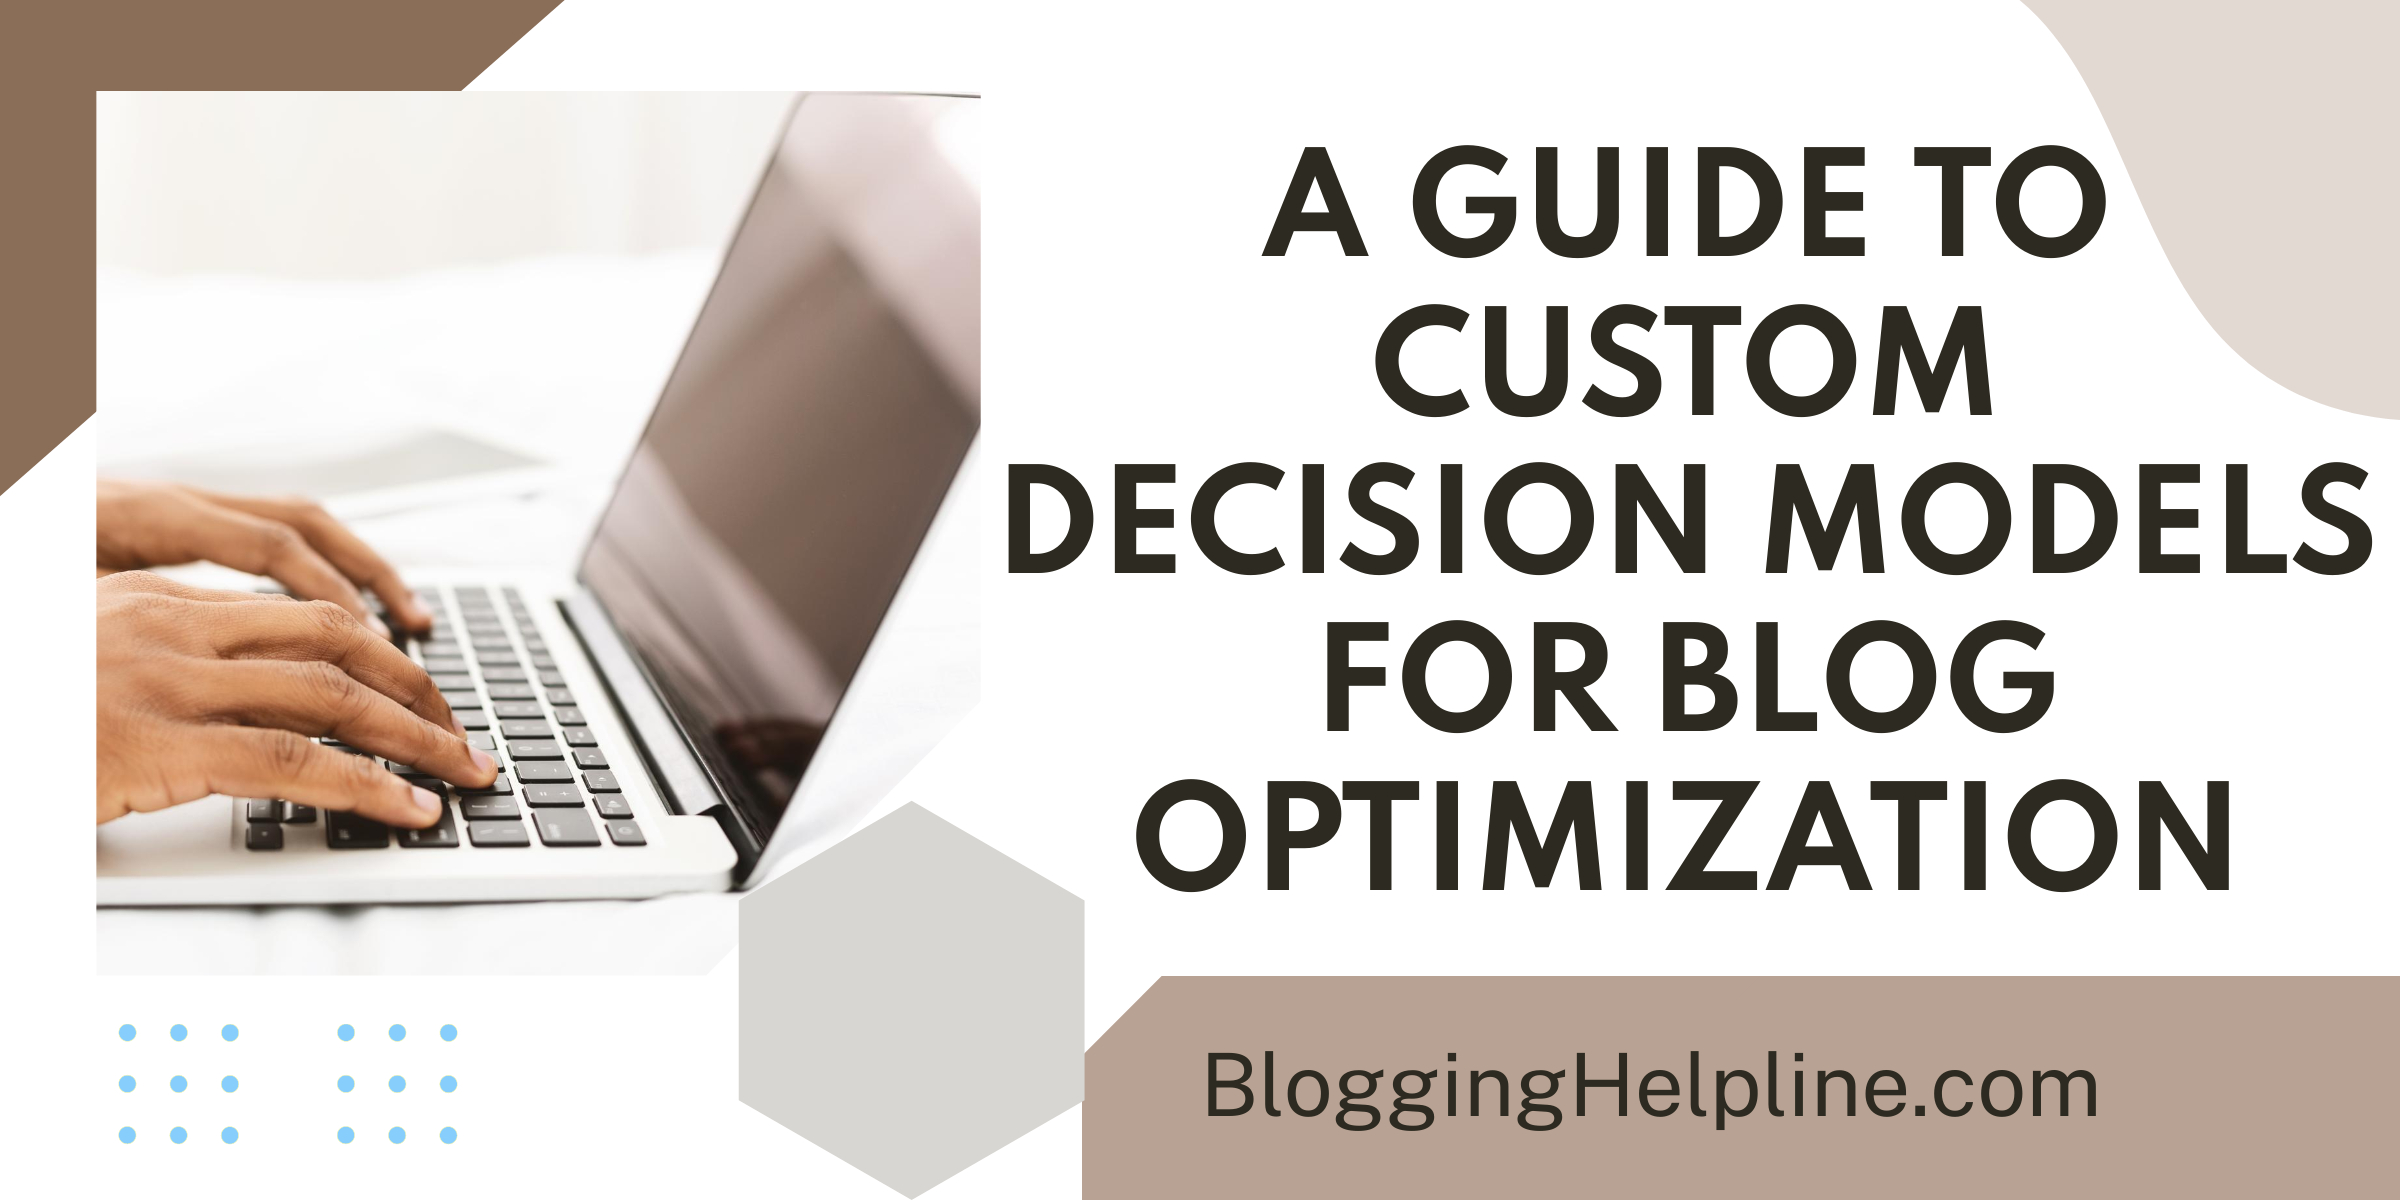 A Guide to Custom Decision Models for Blog Optimization